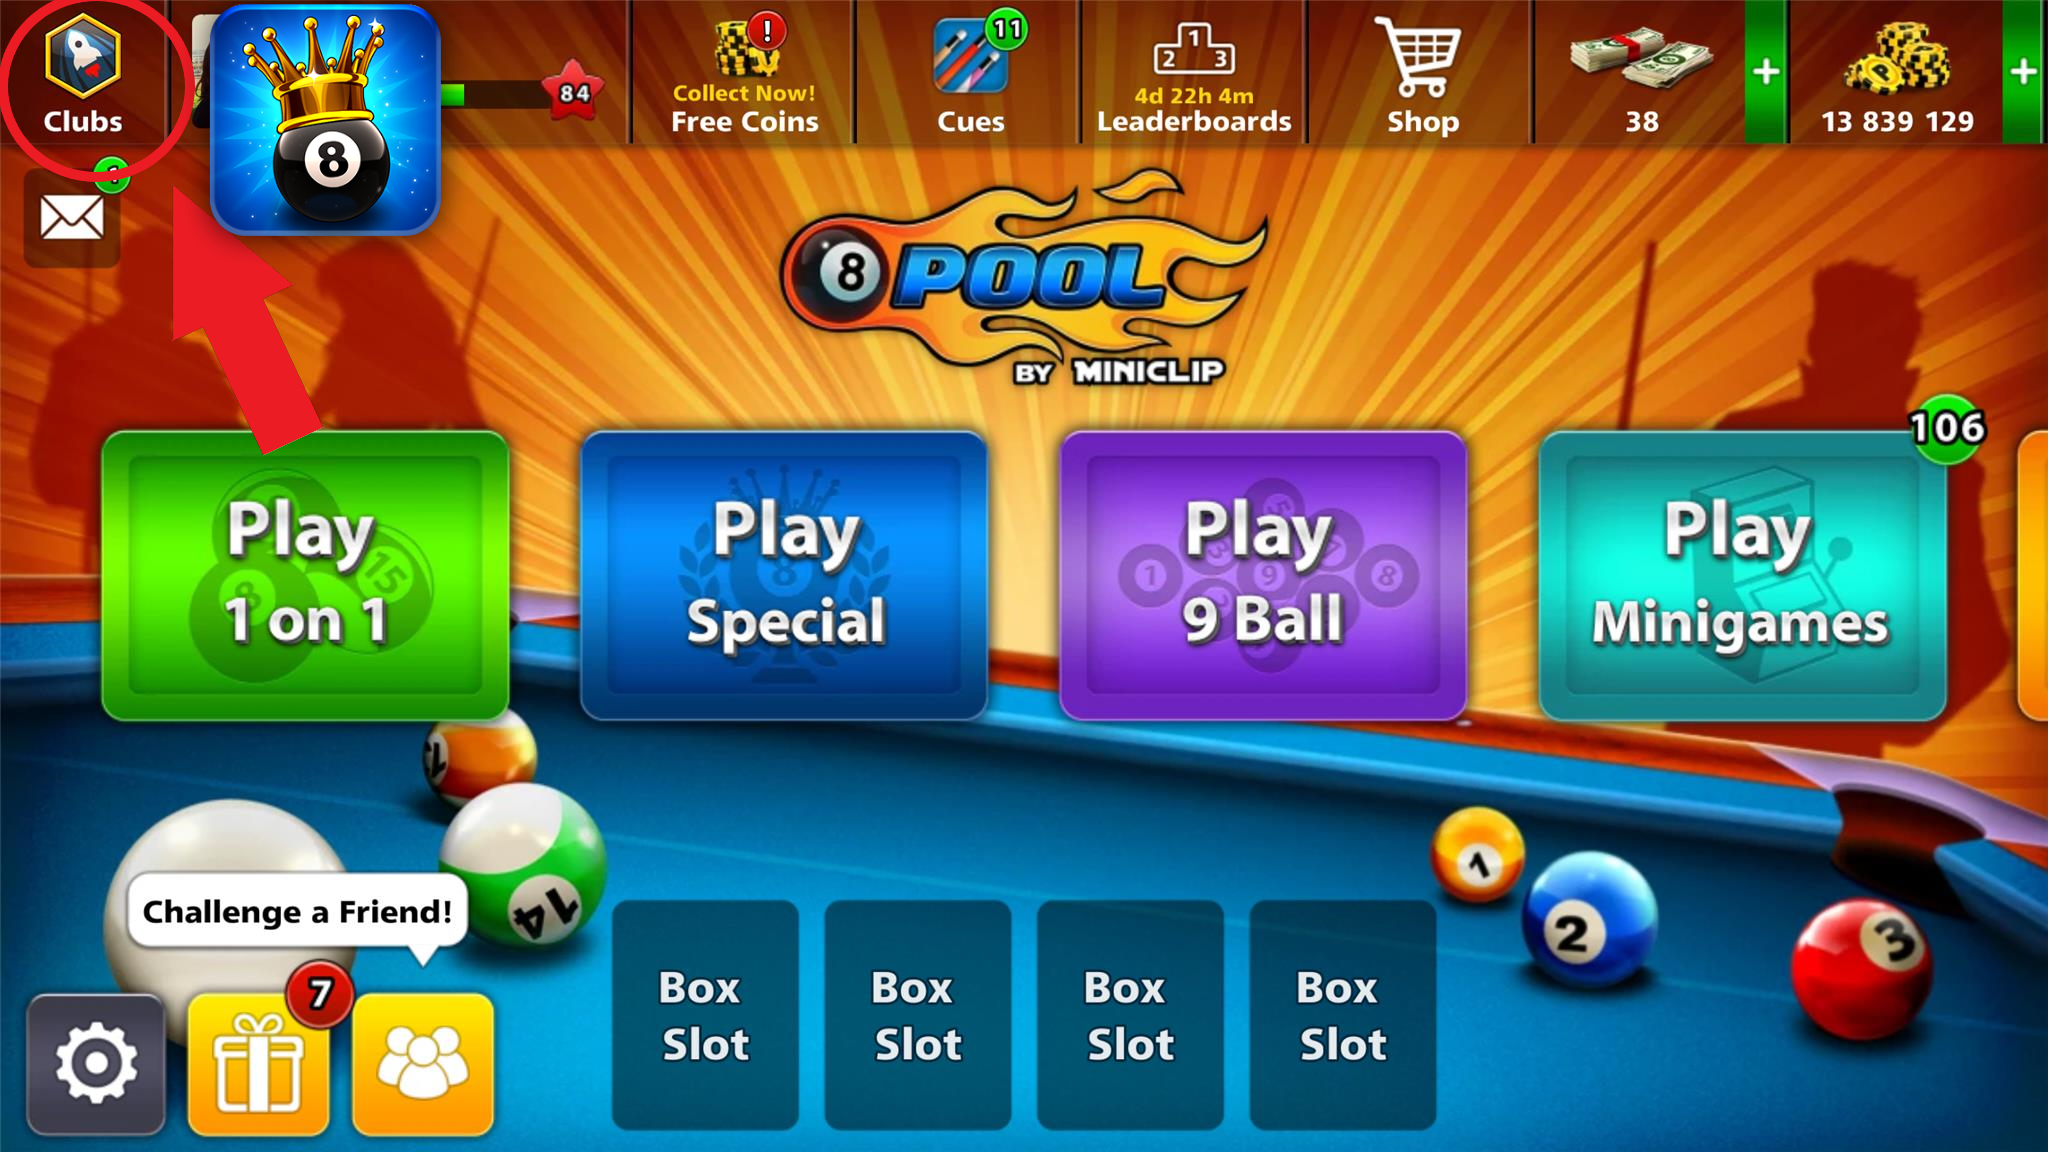 Clubs! What are they and how to create one? - Miniclip ...